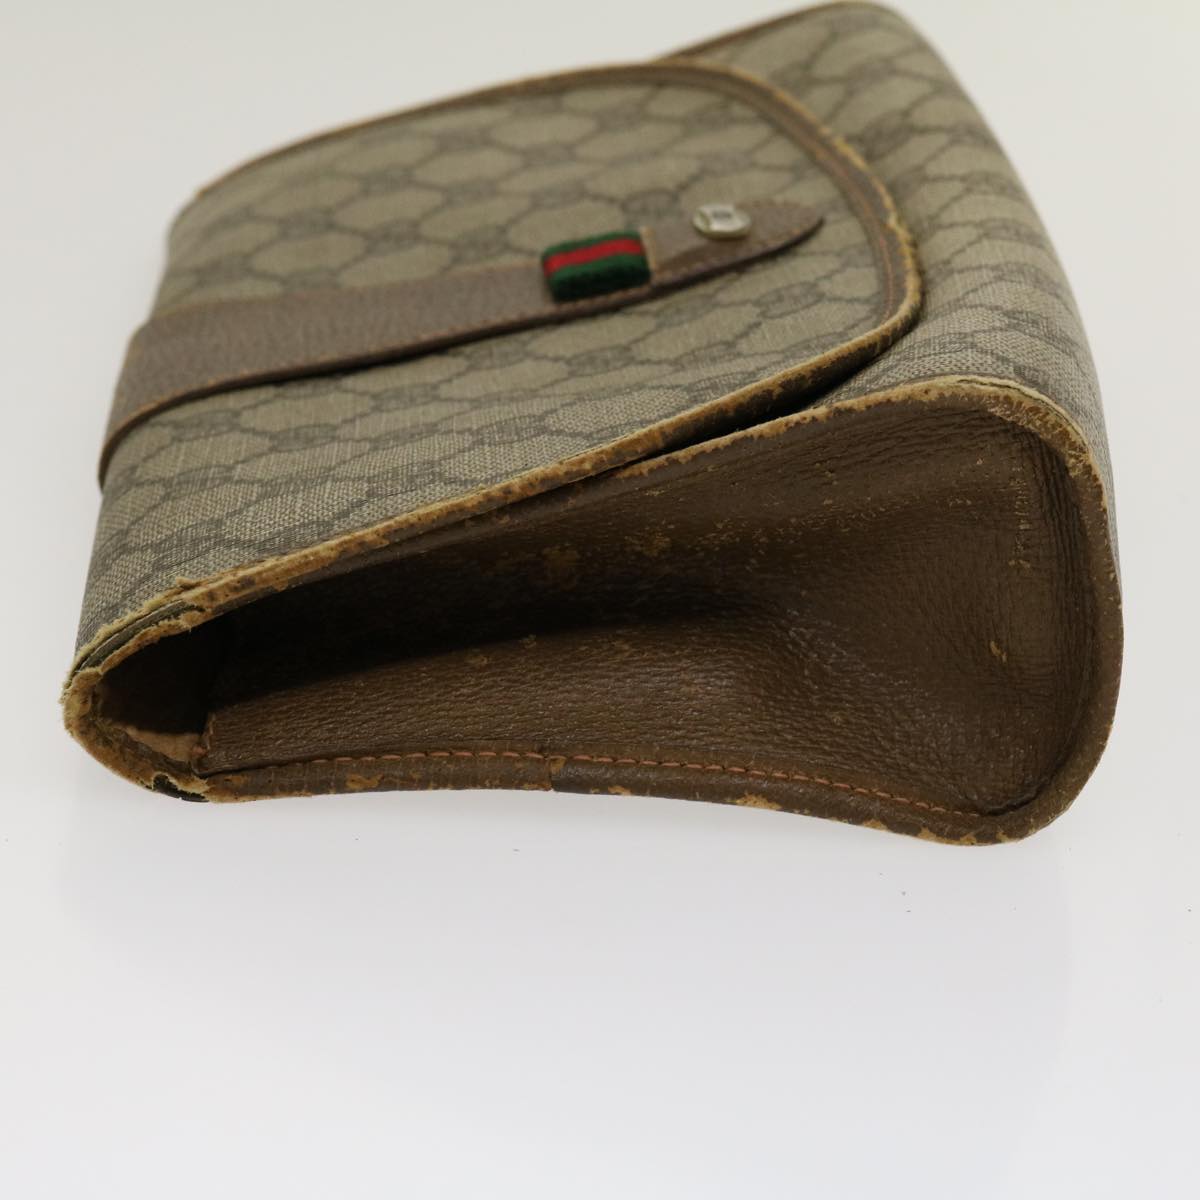 GUCCI Web Sherry Line GG Canvas Clutch Bag Beige Red Green Auth yt864